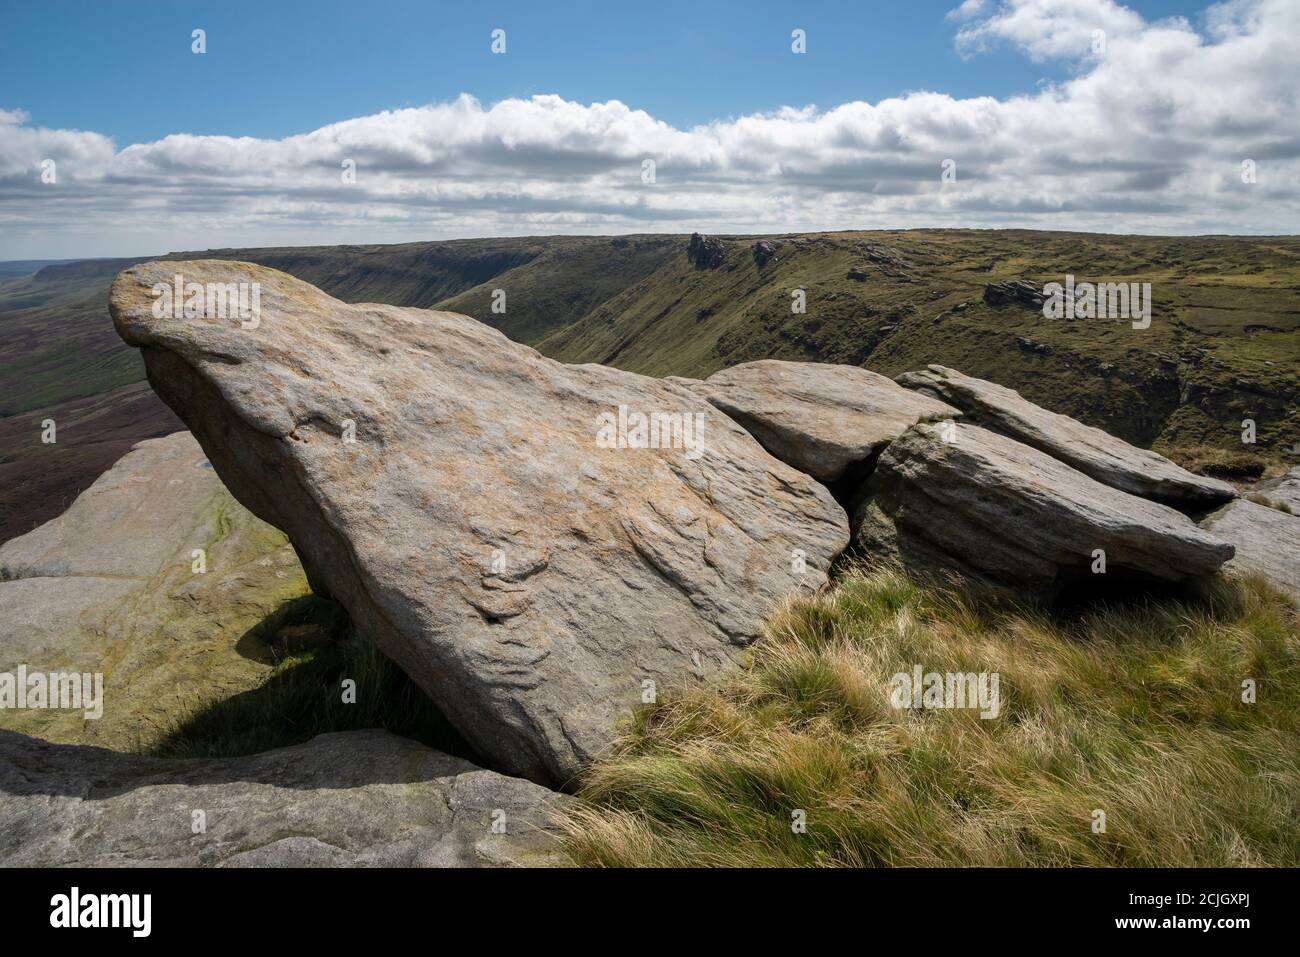 View from the rocks at Fairbrook Naze to Seal Edge on Kinder Scout in the Peak District national park, Derbyshire, England. Stock Photo